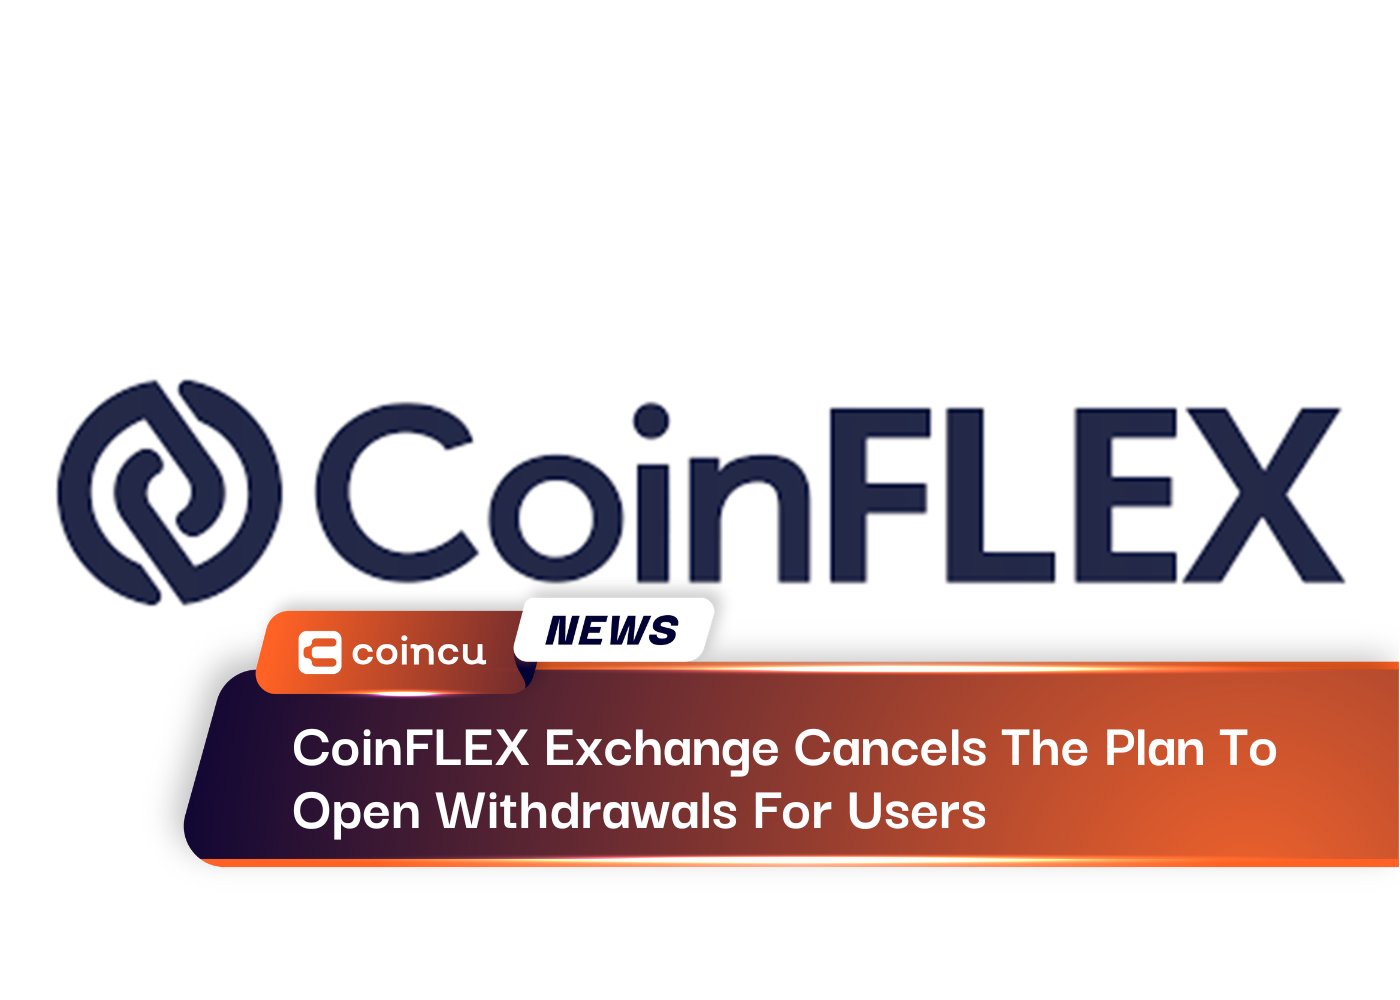 CoinFLEX Exchange Cancels The Plan To Open Withdrawals For Users